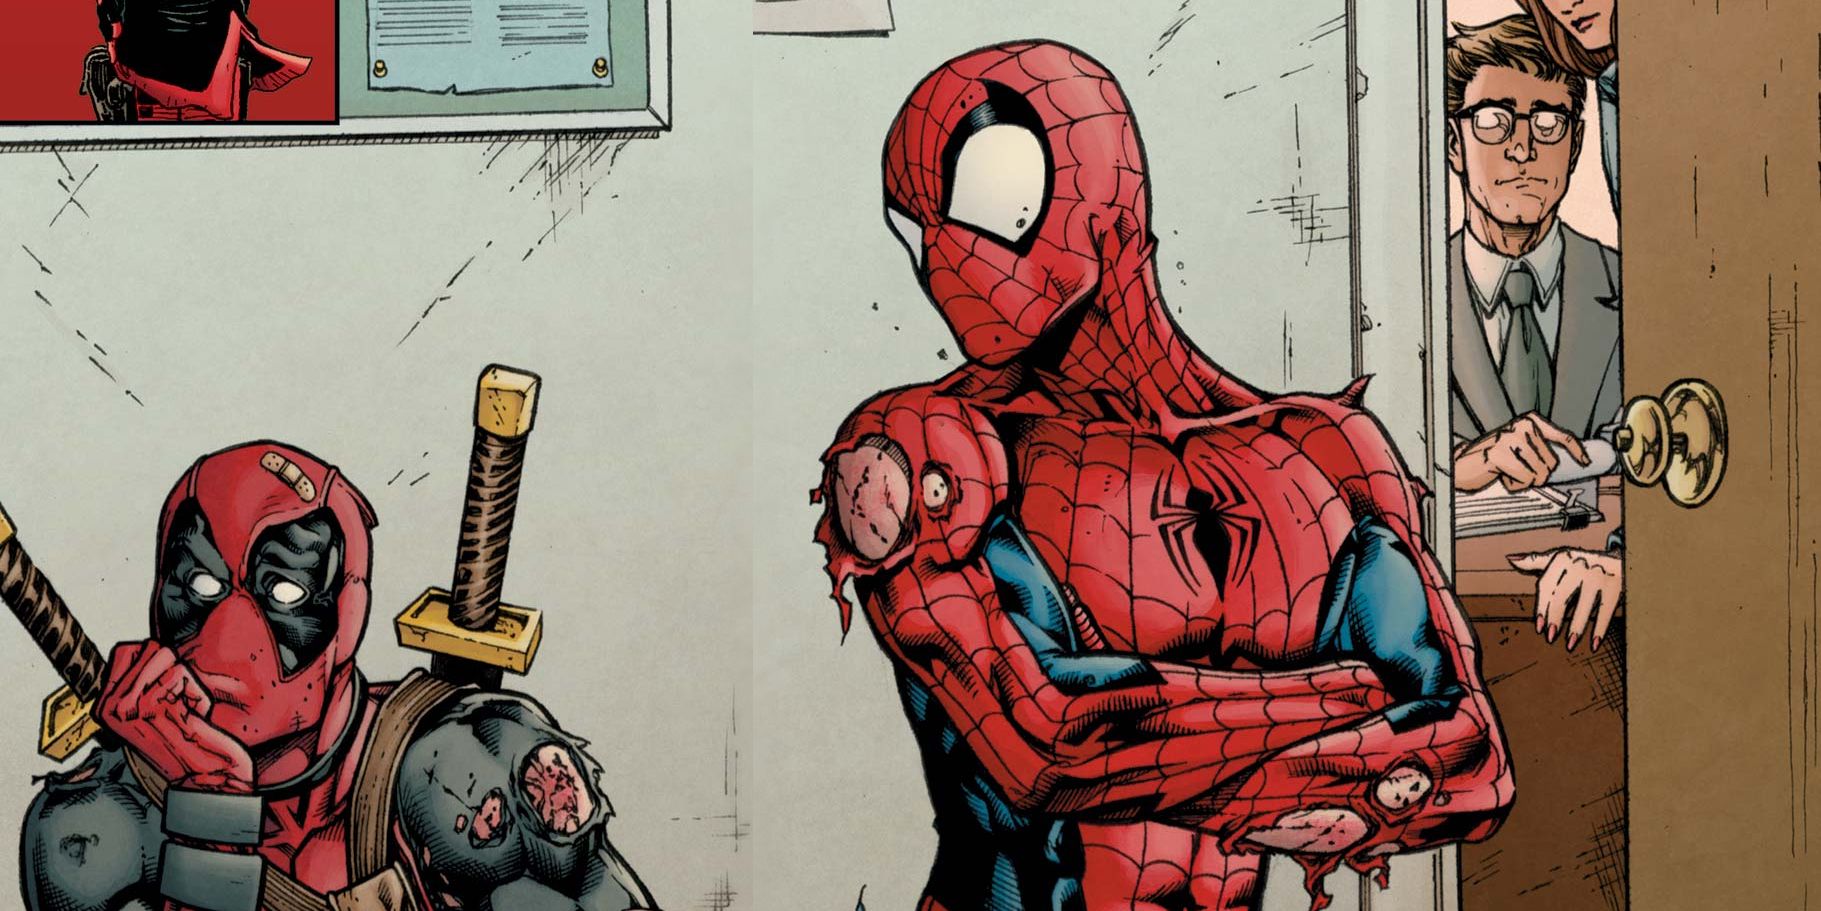 Spider-Man and Deadpool in Marvel Comics